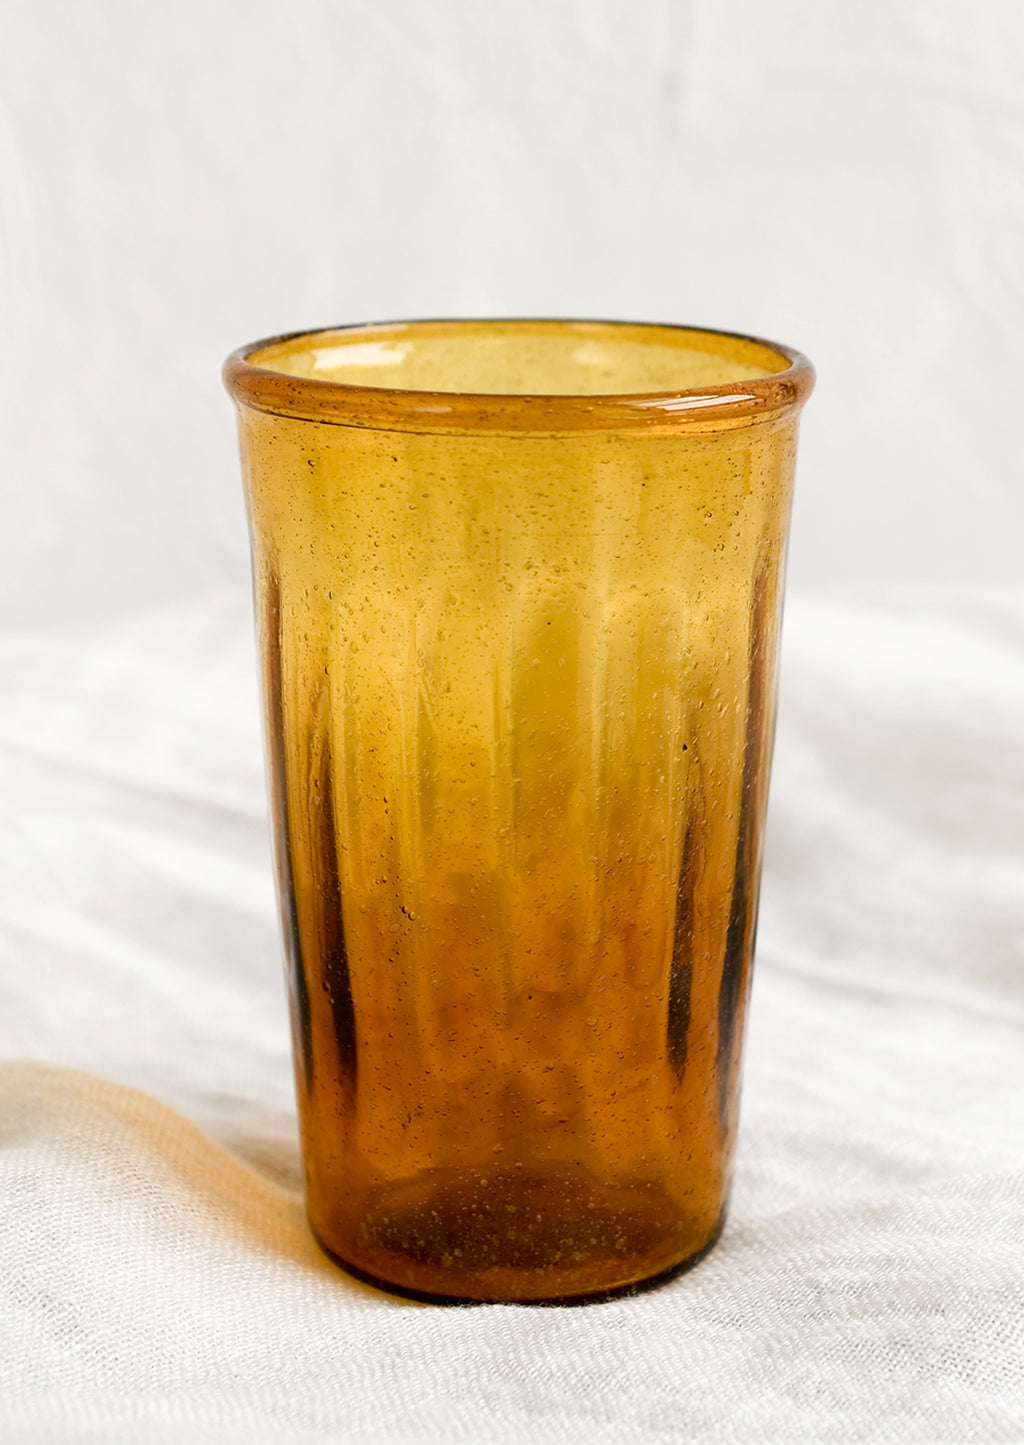 Amber: A glass tumbler in amber color.